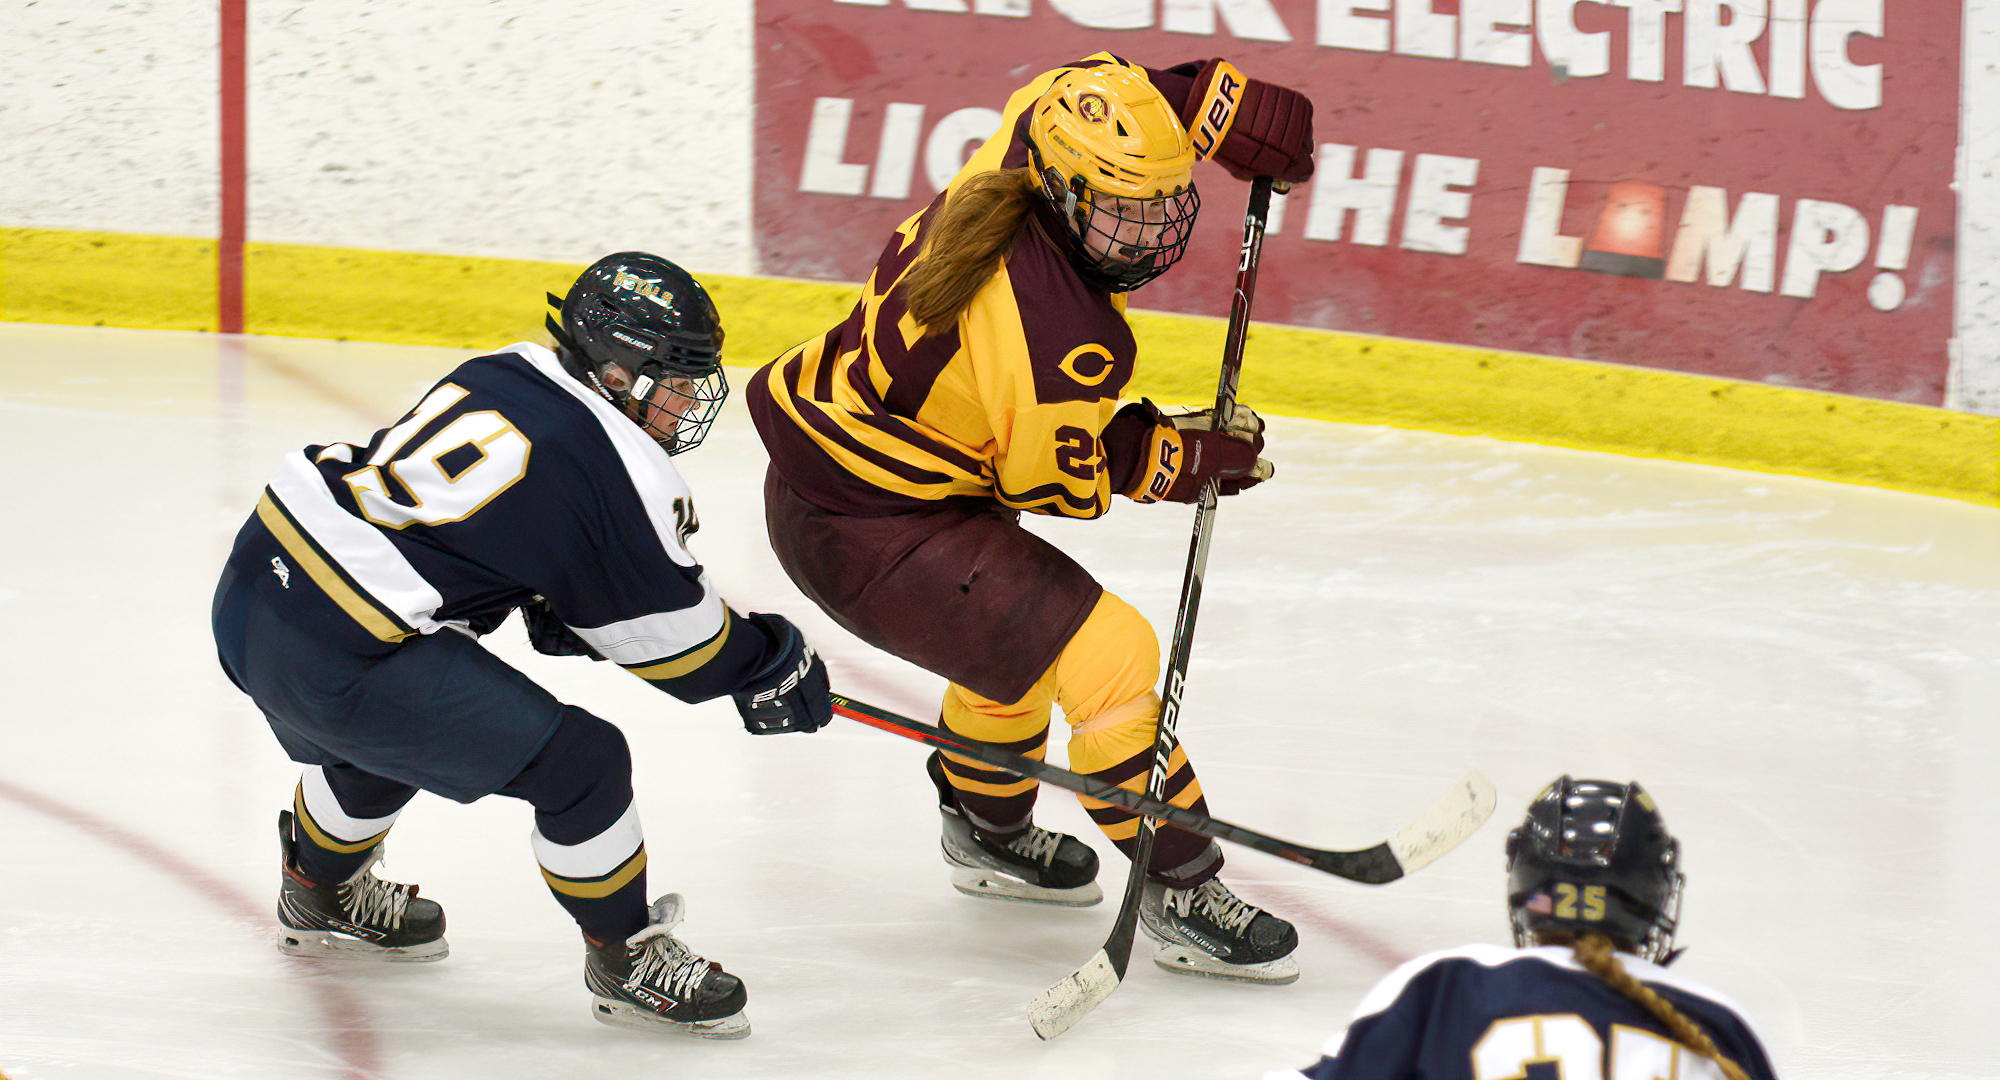 Jerica Friese scored one of the Cobbers' two goals in their series finale at Bethel. She had two goals in the series.